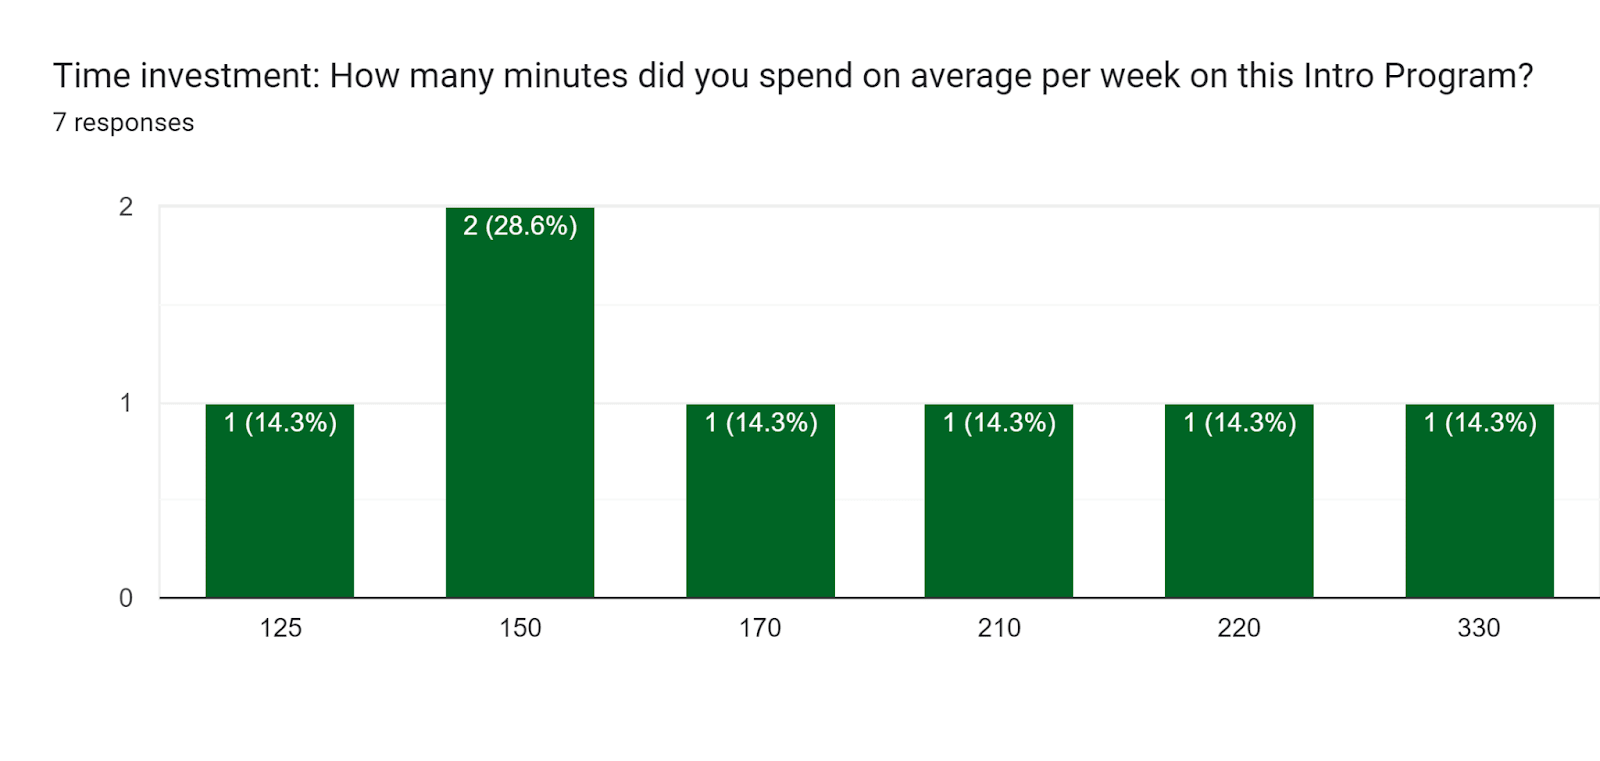 Forms response chart. Question title: Time investment: How many minutes did you spend on average per week on this Intro Program?. Number of responses: 7 responses.